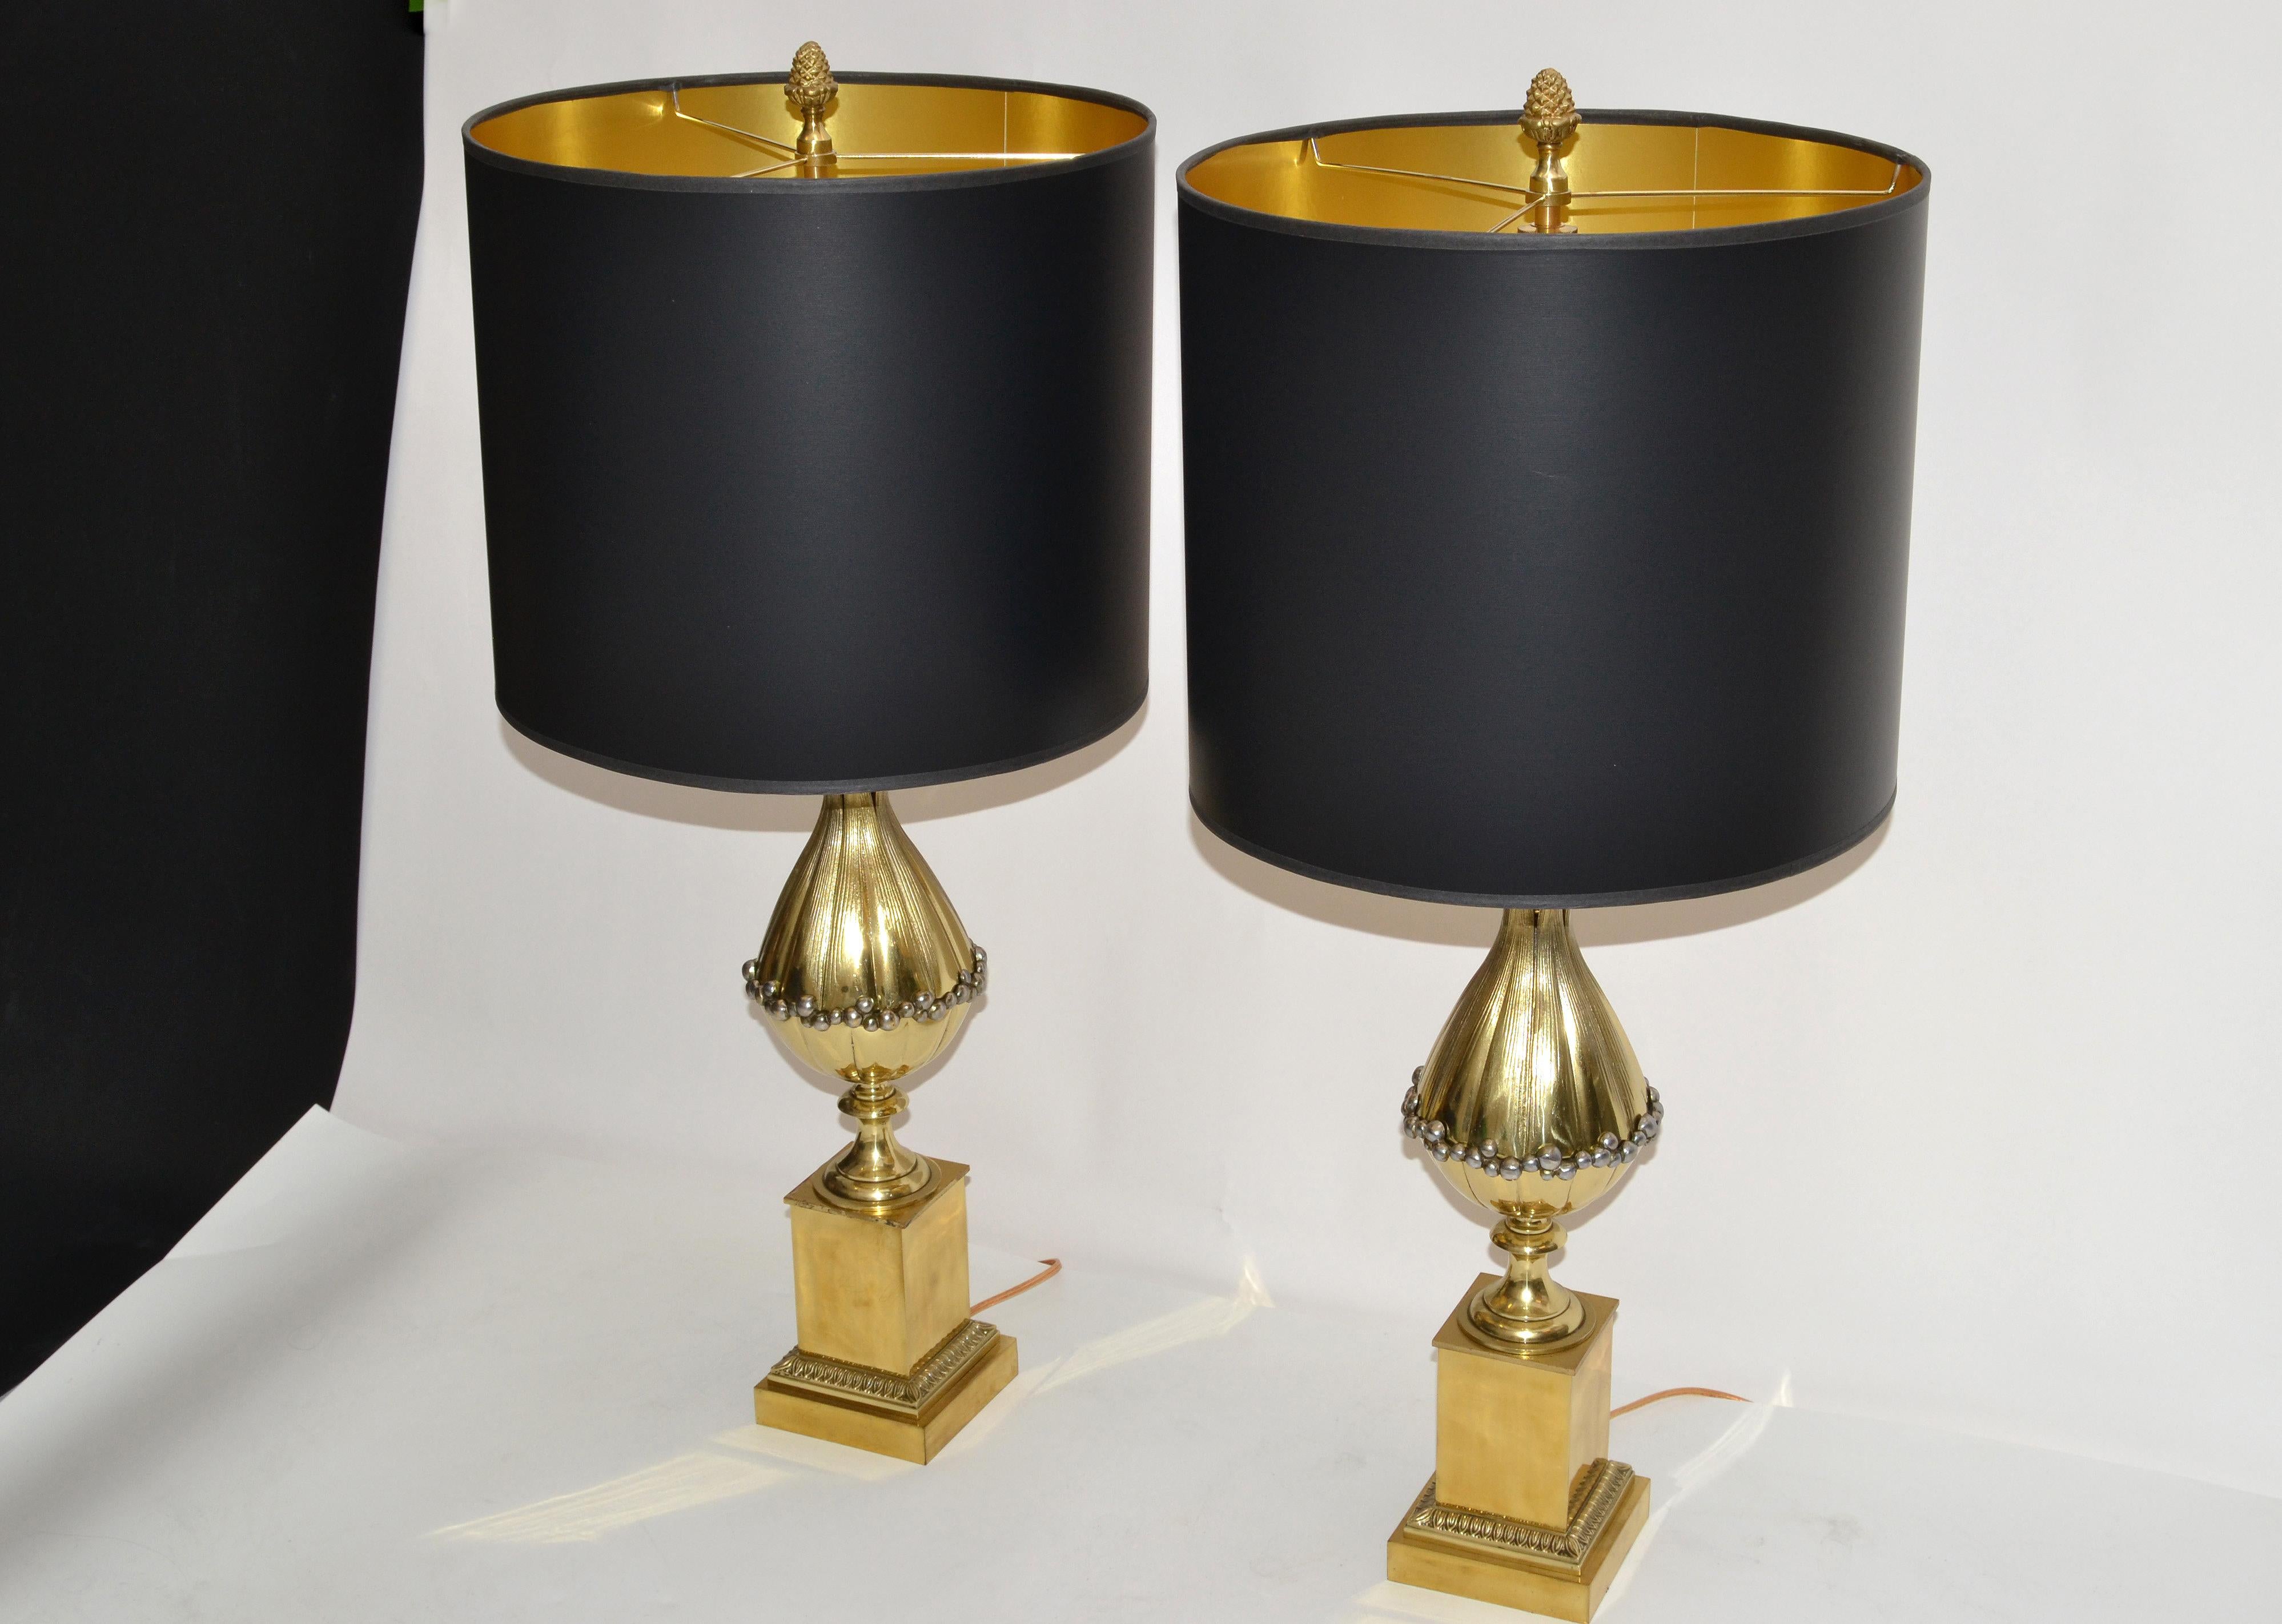 Maison Charles French Art Deco Lotus Bronze Table Lamp Black & Gold Shade, Pair In Good Condition For Sale In Miami, FL